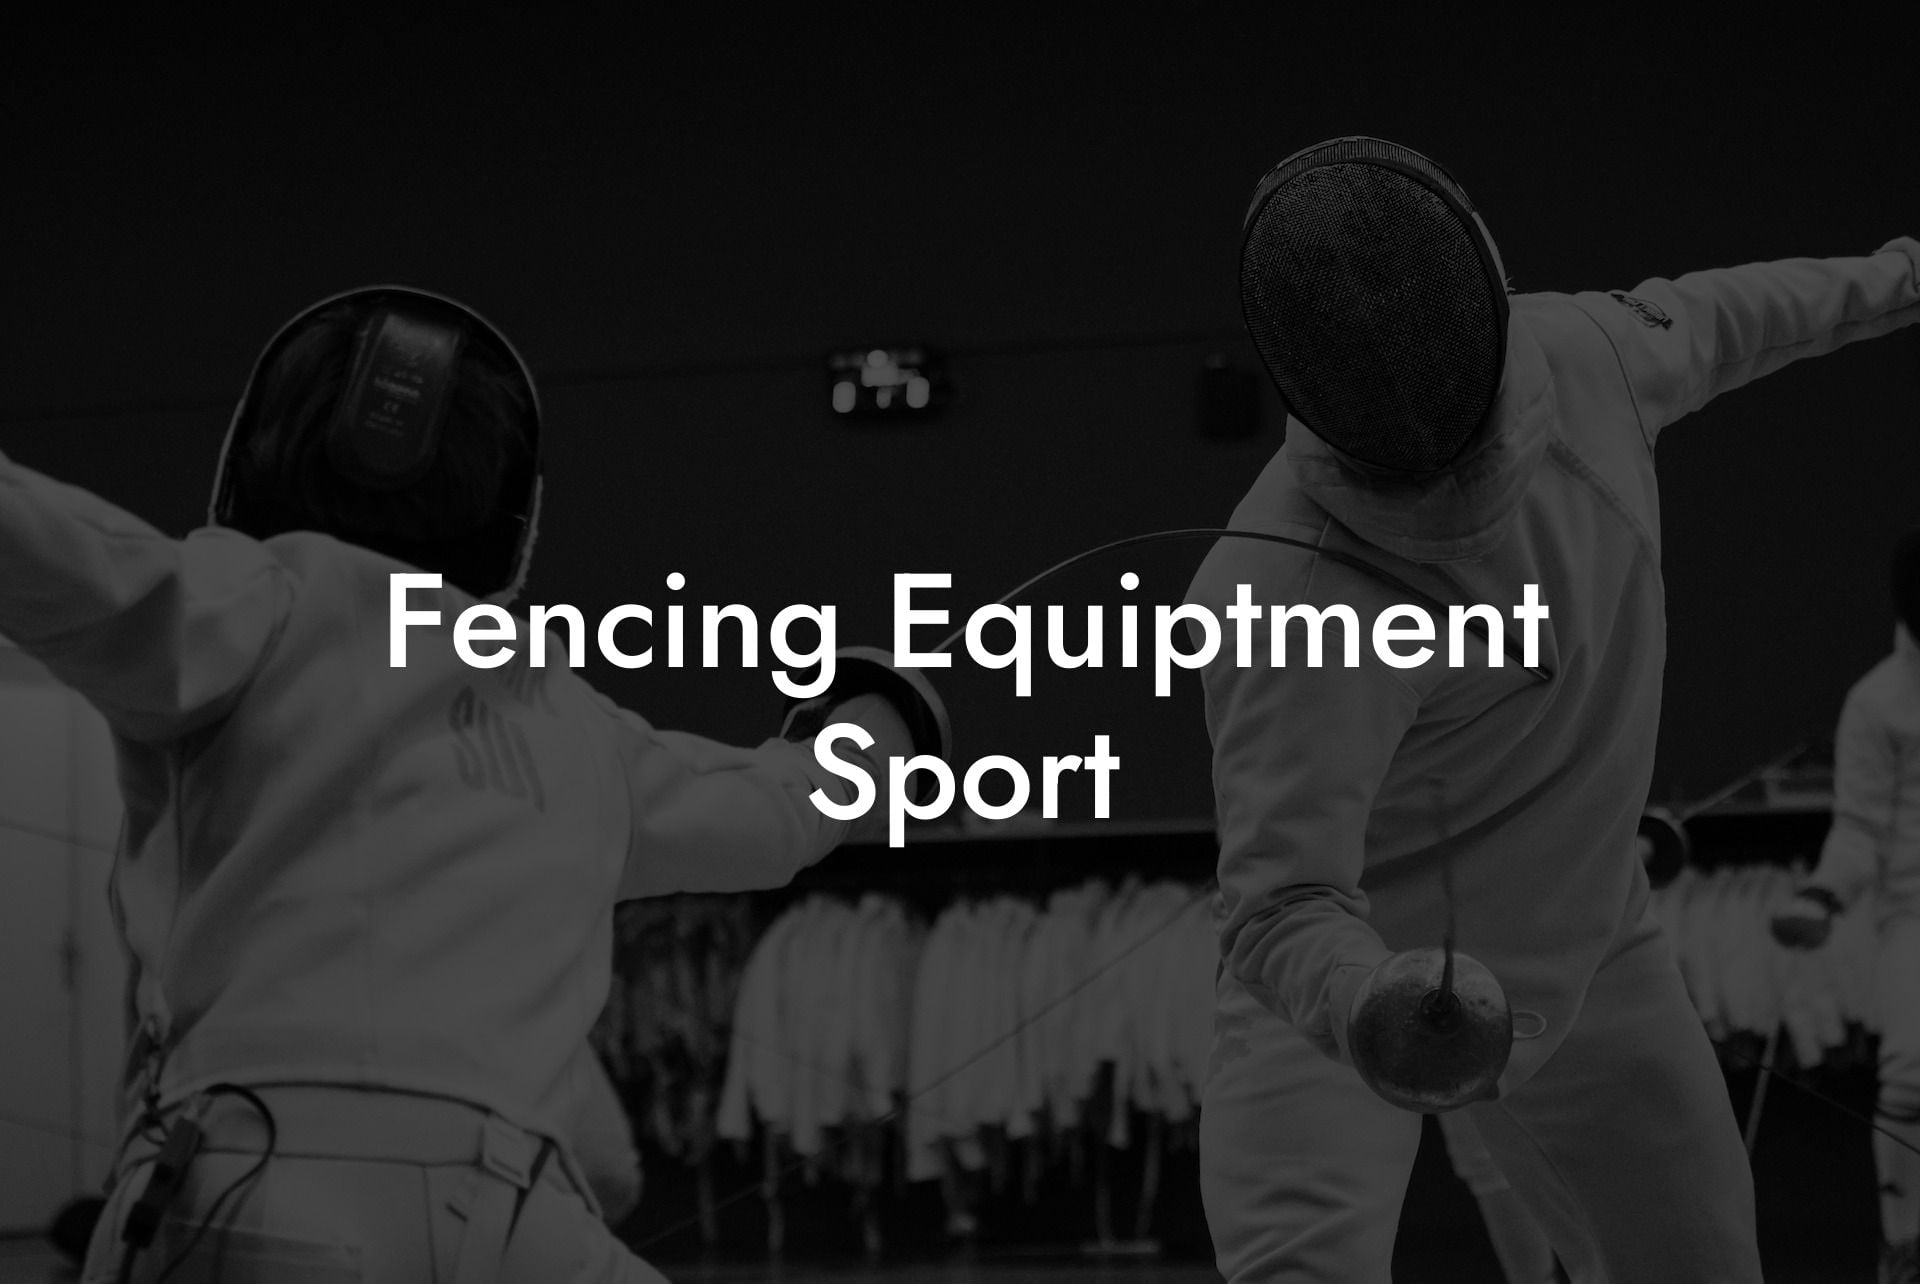 Fencing Equiptment Sport